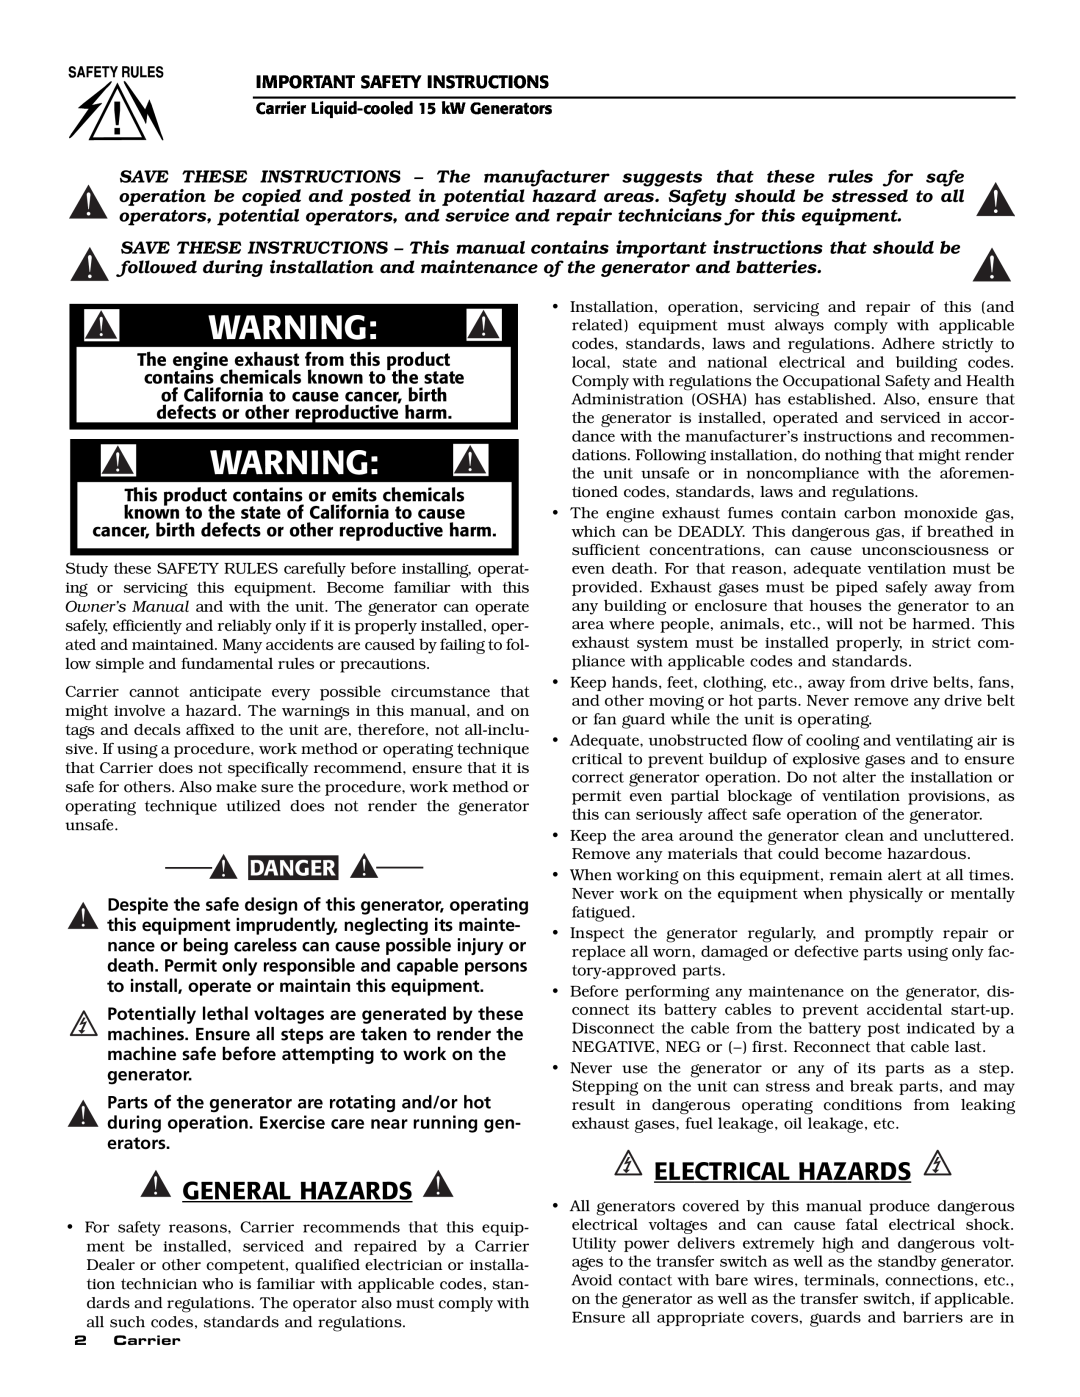 Generac ASPAS1CCL015 General Hazards, Electrical Hazards, Danger, to install, operate or maintain this equipment 